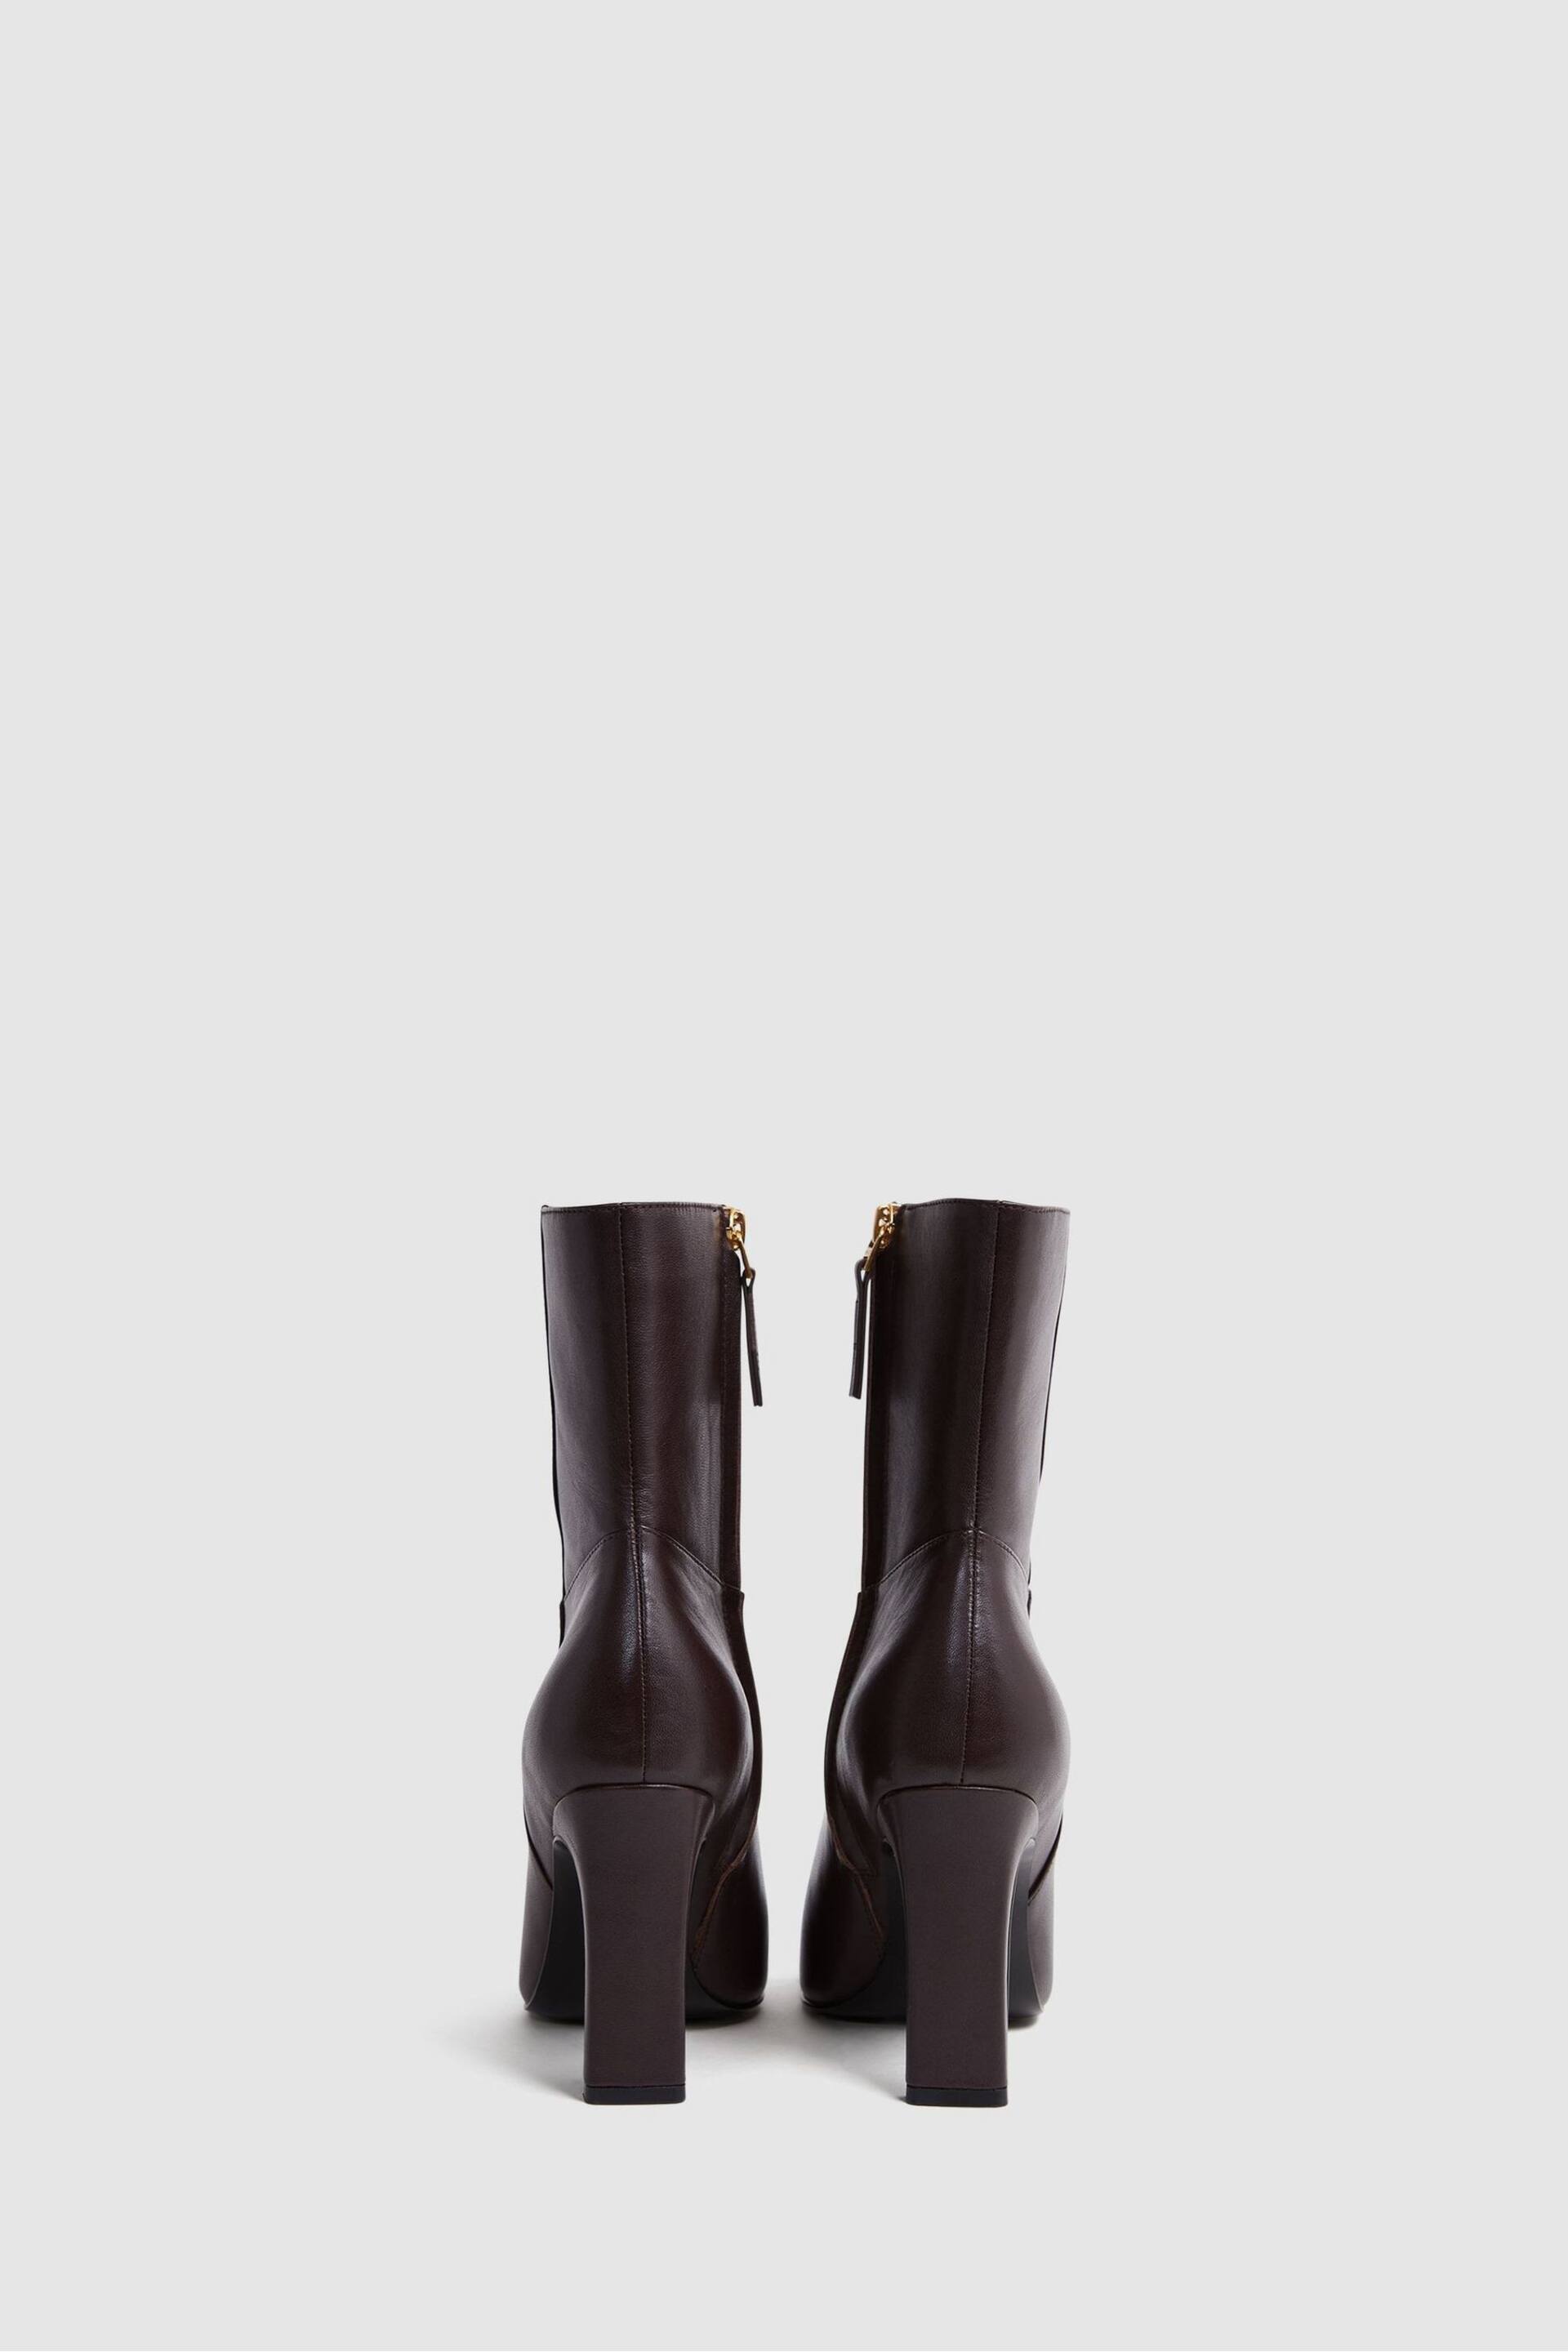 Reiss Burgundy Vanessa Leather Heeled Ankle Boots - Image 4 of 5